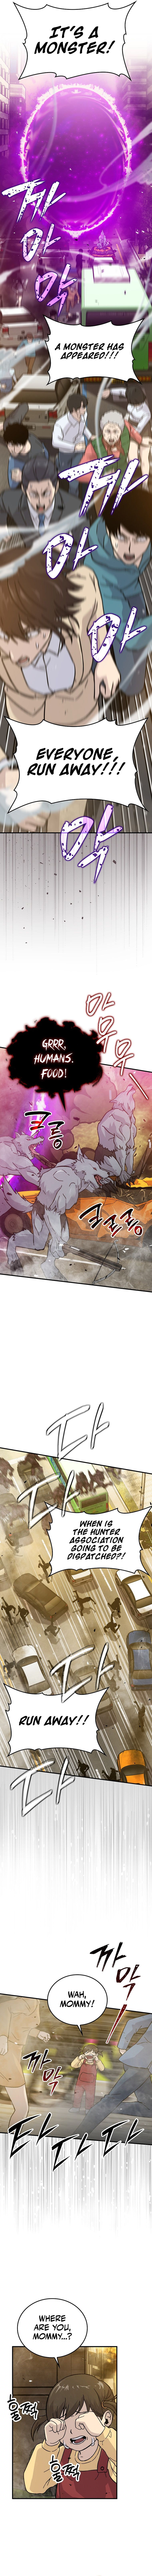 Demon Lord’s Martial Arts Ascension chapter 9